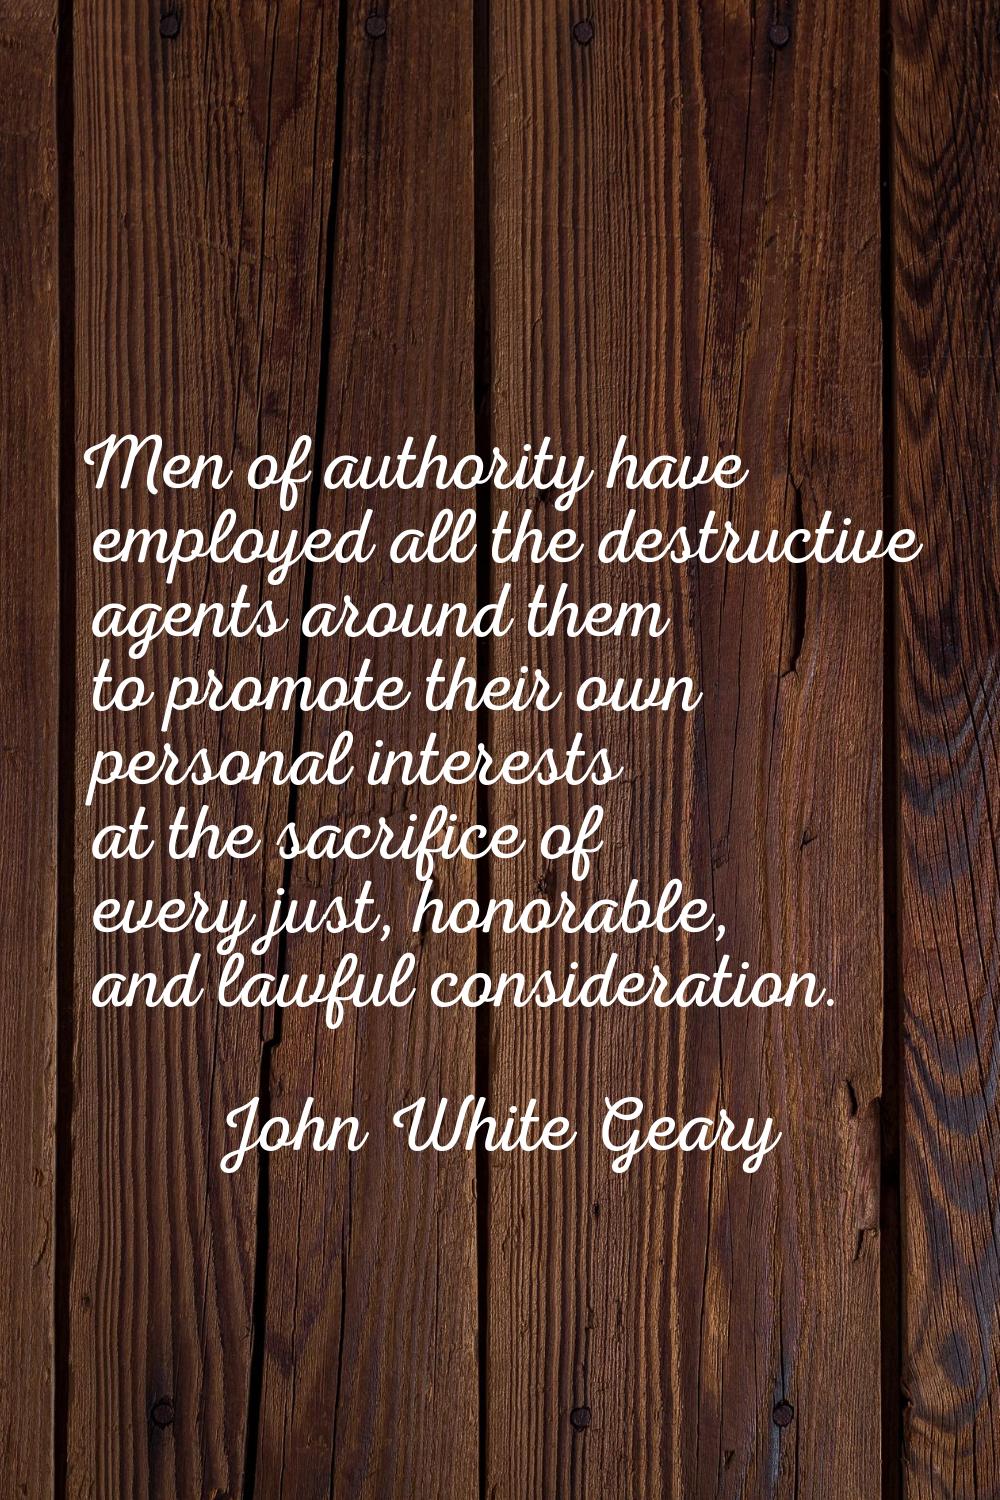 Men of authority have employed all the destructive agents around them to promote their own personal